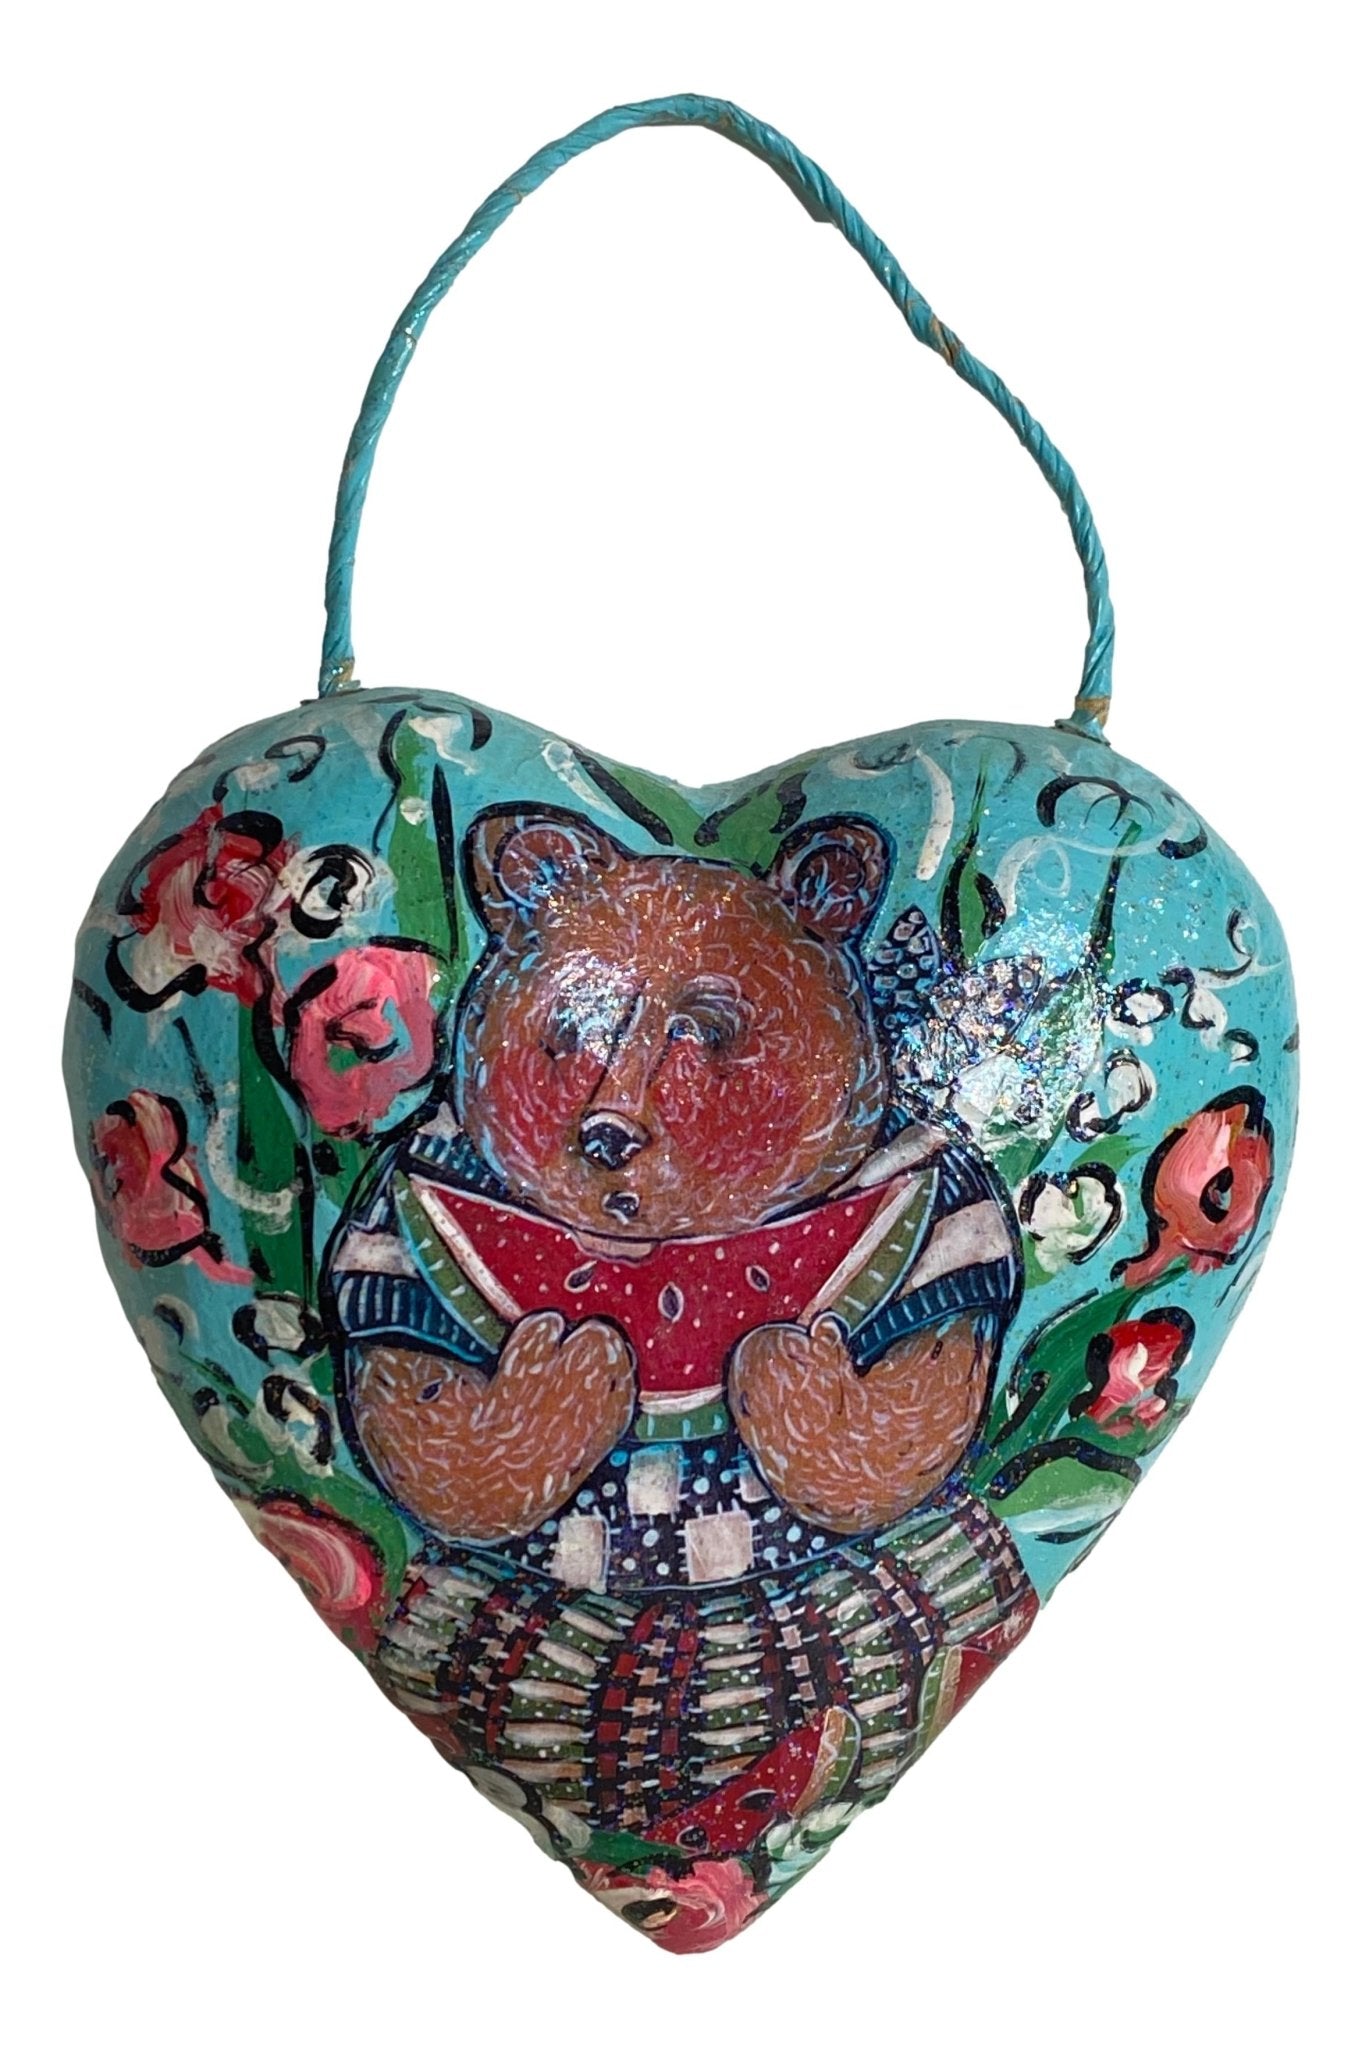 Ornament Paper Mache Heart Bear Eating Watermelon Handcrafted by Local Artist 5 1/2 L x 2 1/2 W x 9 H Inches - Ysleta Mission Gift Shop- VOTED 2022 El Paso's Best Gift Shop